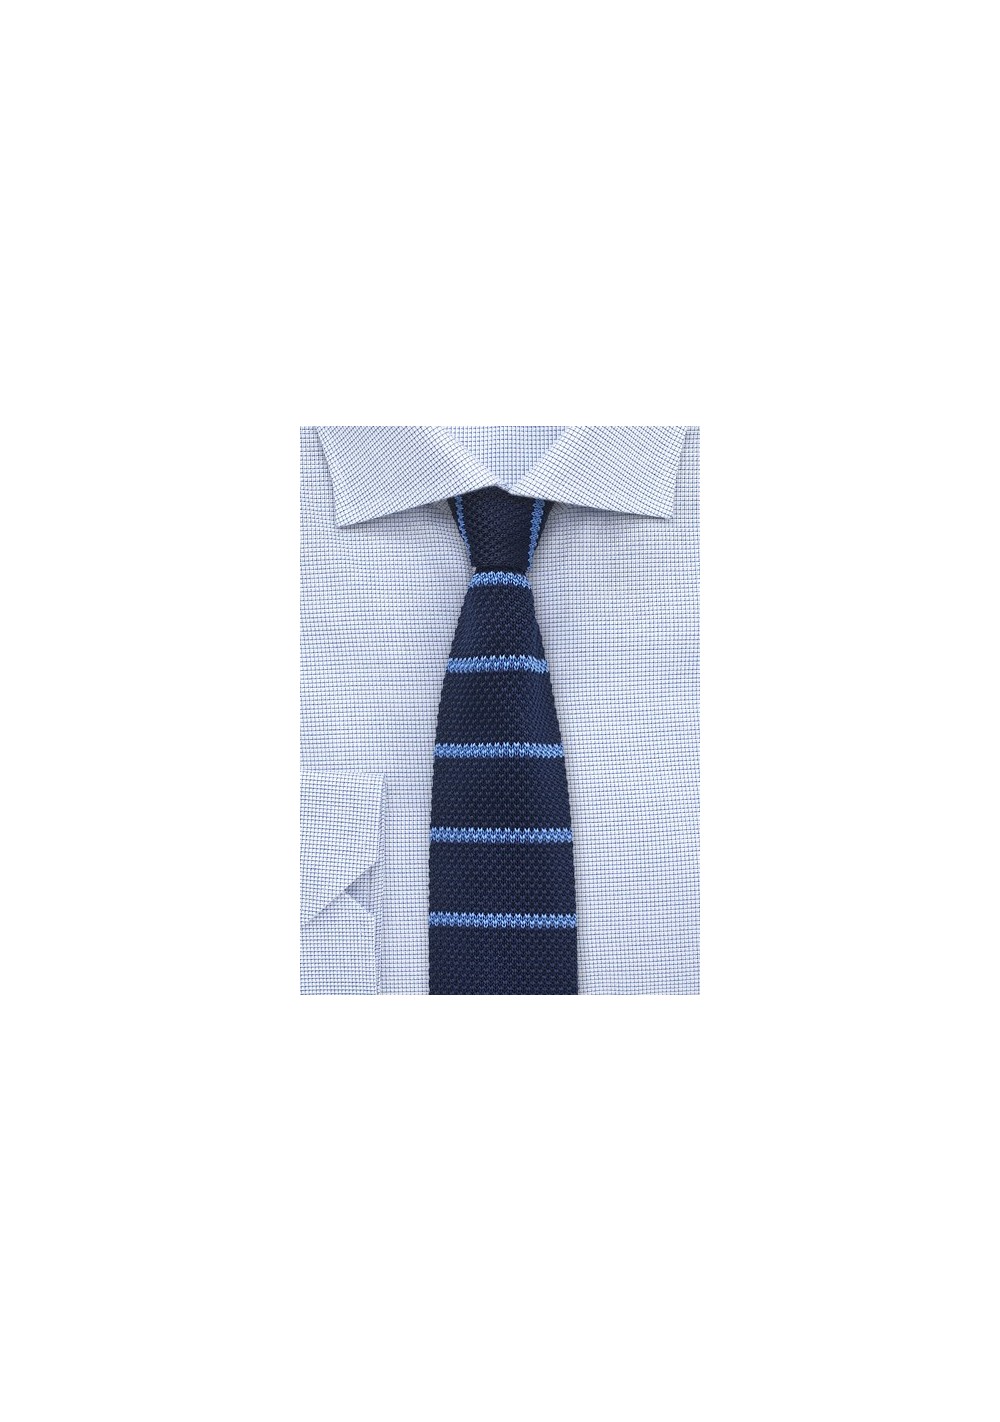 Striped Silk Knit Tie in Navy and Light Blue